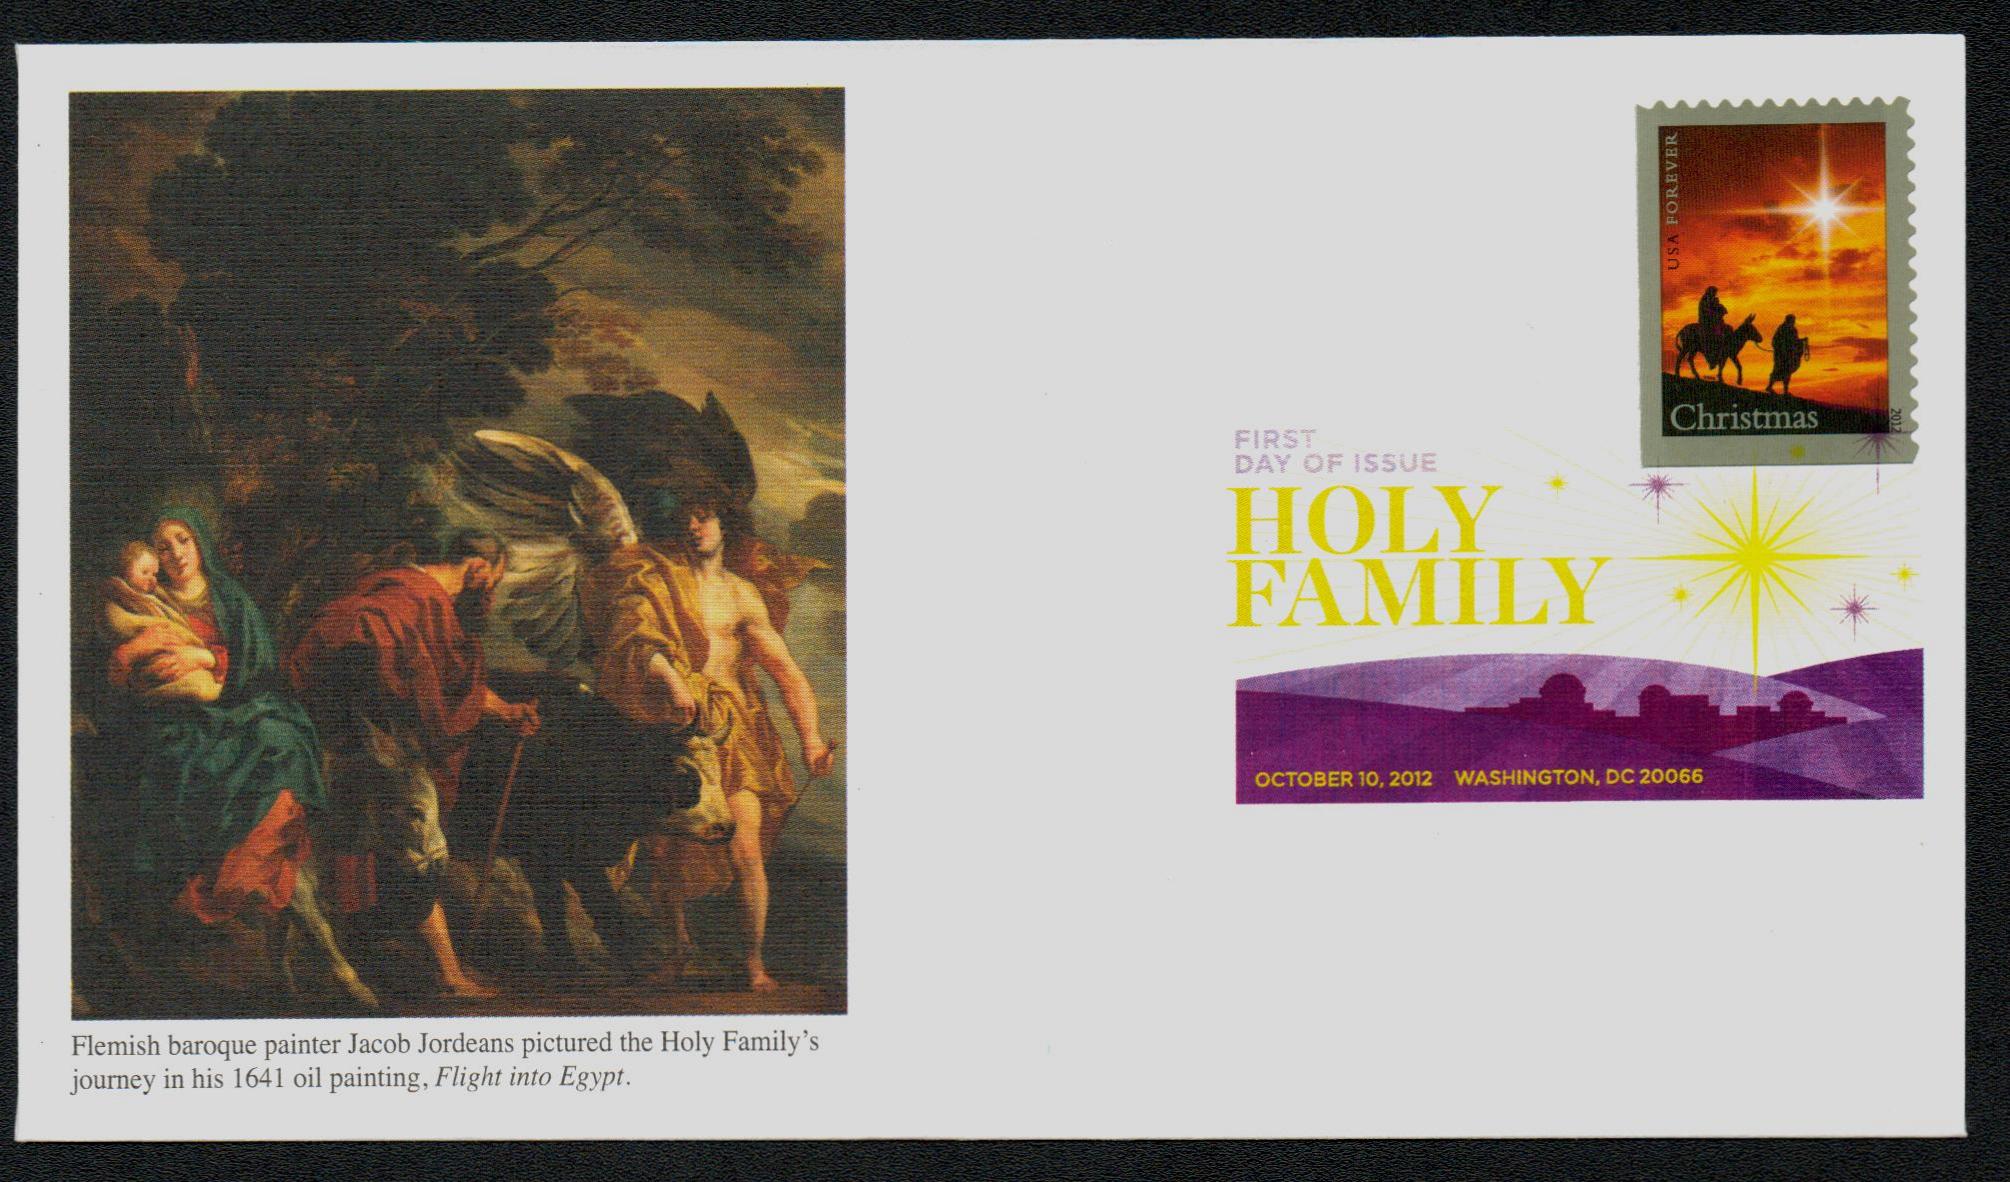 JDDWMFZ Nativity USPS Forever First Class Postage Stamp U.S. Holy Family  Holiday Christmas Sheets (80 Stamps) (4 Booklets of 20